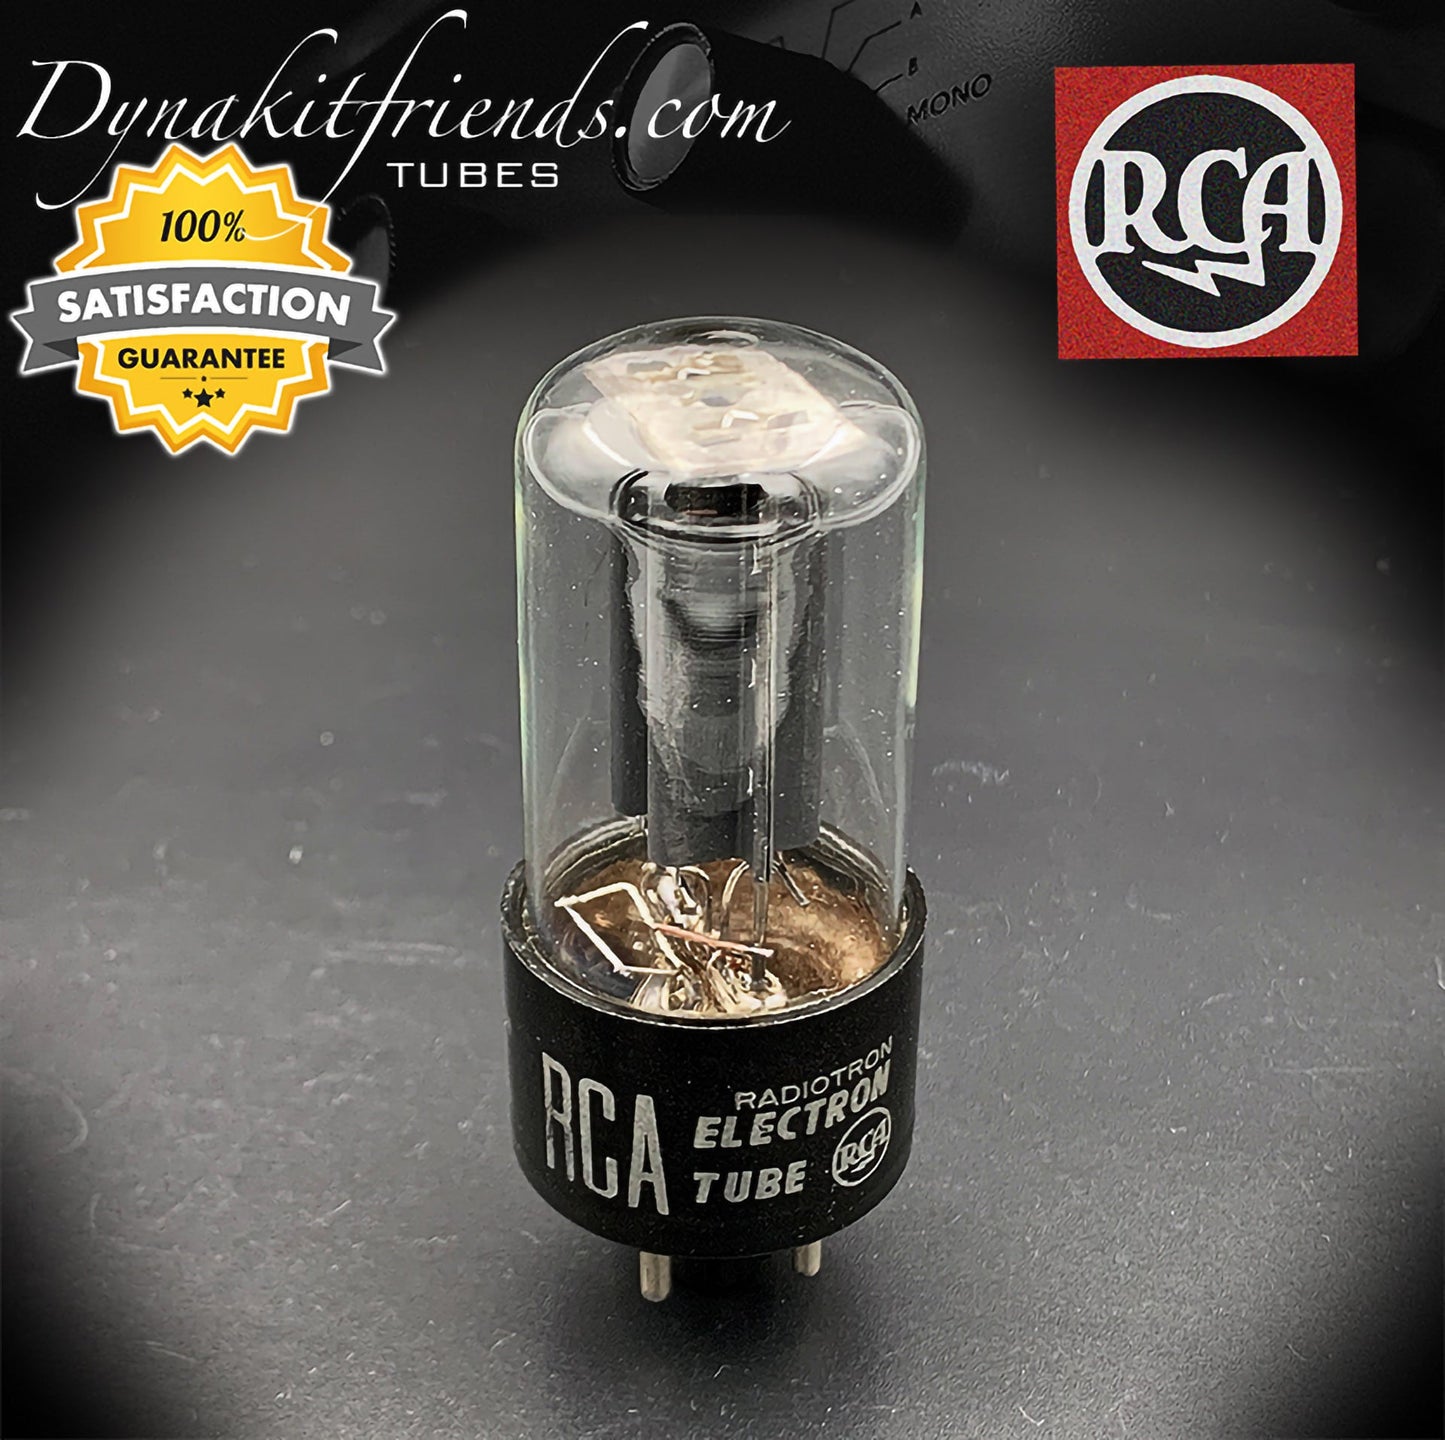 5Y3GT ( 5Y3GT/G ) RCA Black Plates D/[] Getter Tube Rectifier Made in USA '56 - Vacuum Tubes Treasures